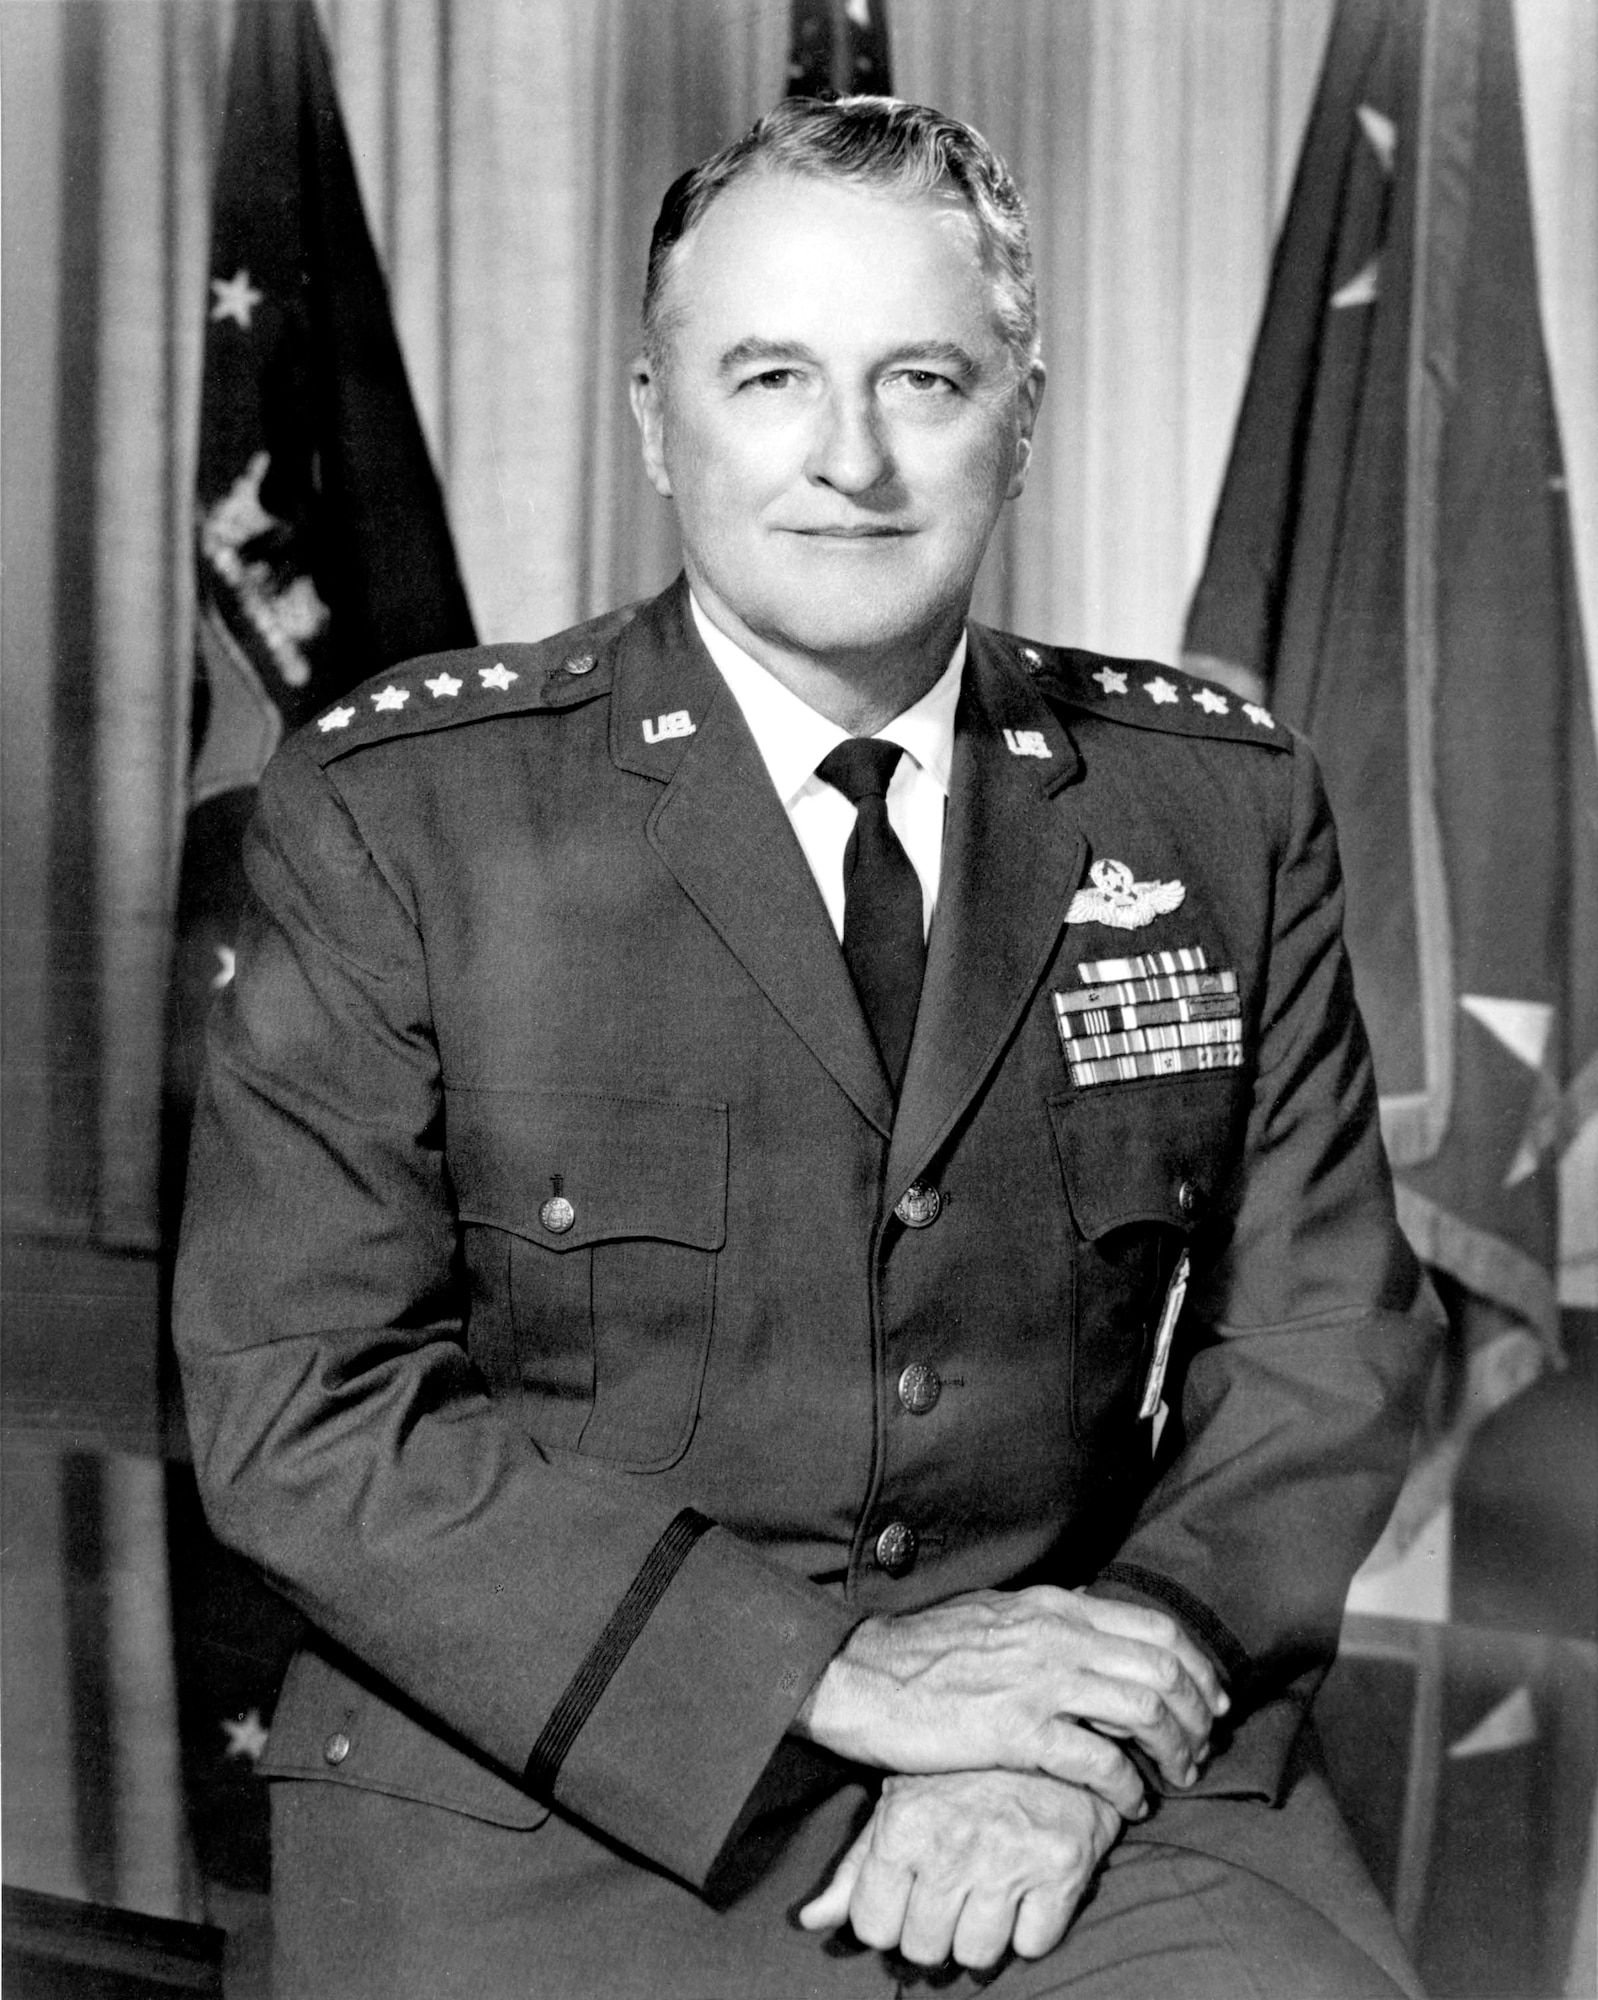 Gen. Paul K. Carlton, former commander of the Military Airlift Command, passed away Nov. 23 at the age of 89 in San Antonio.  General Carlton was commander of MAC from Sept. 26, 1972, to March 31, 1977.